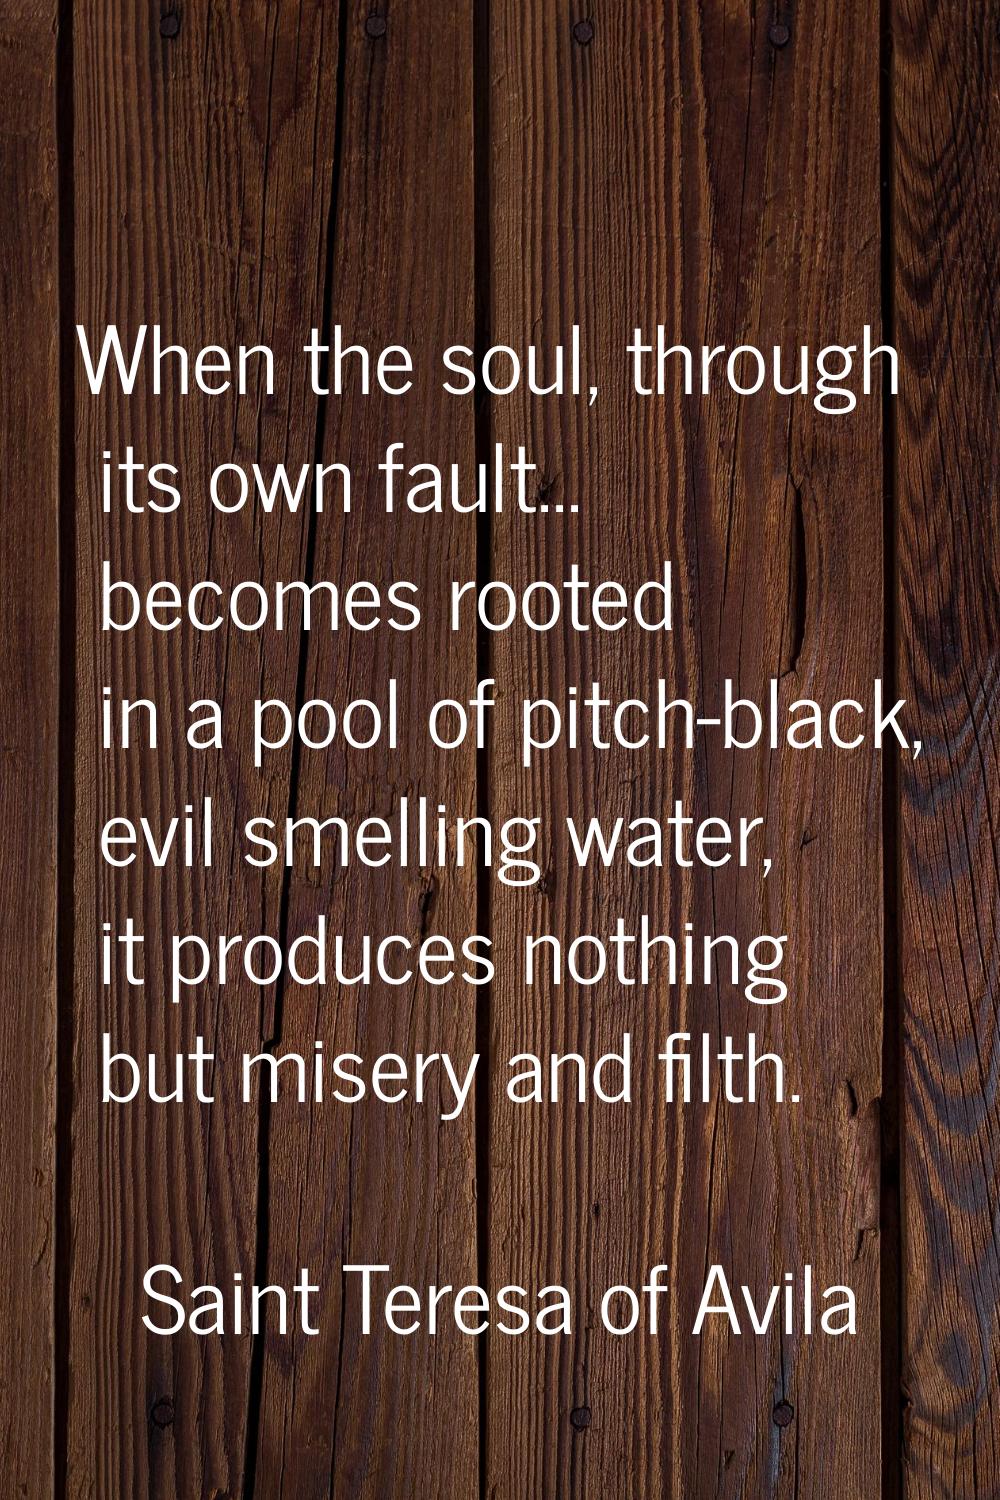 When the soul, through its own fault... becomes rooted in a pool of pitch-black, evil smelling wate